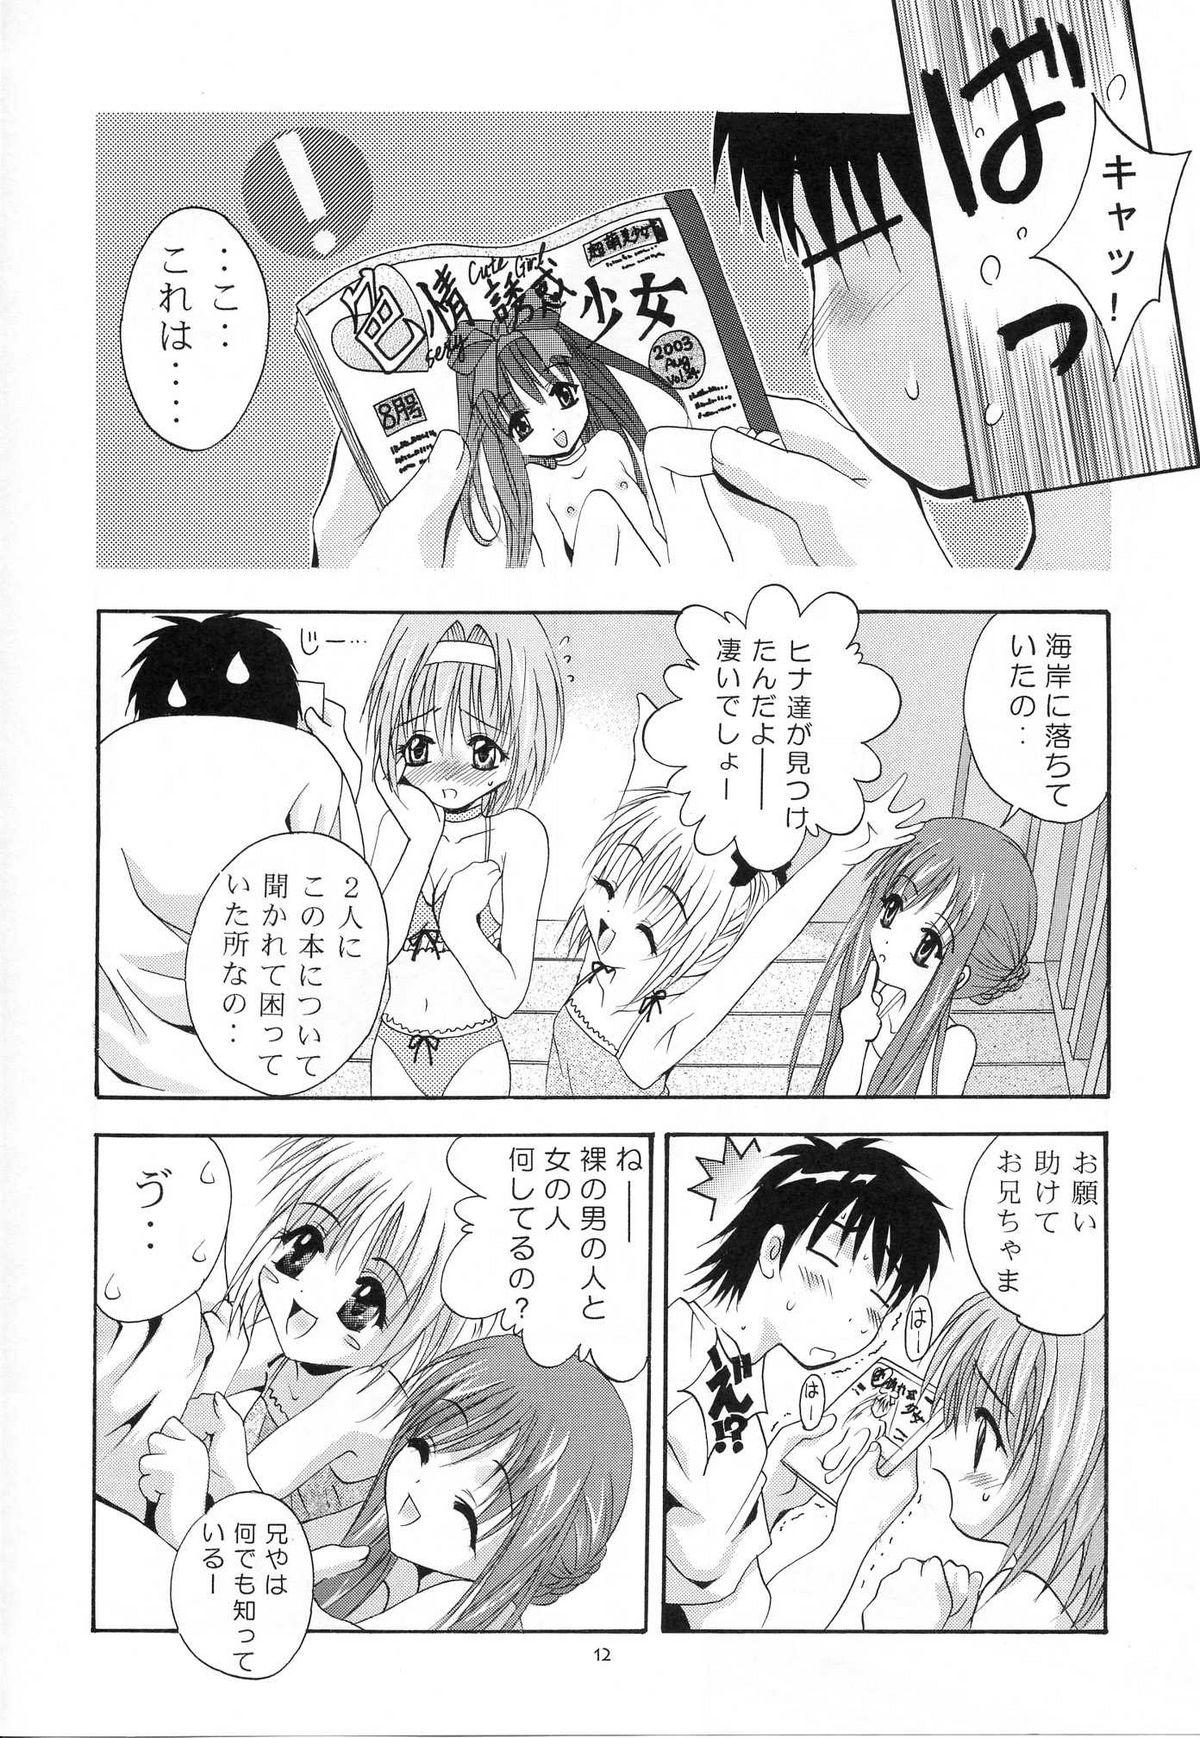 Stepfather Mousou Mini Theater 11 - Sister princess Solo Girl - Page 11